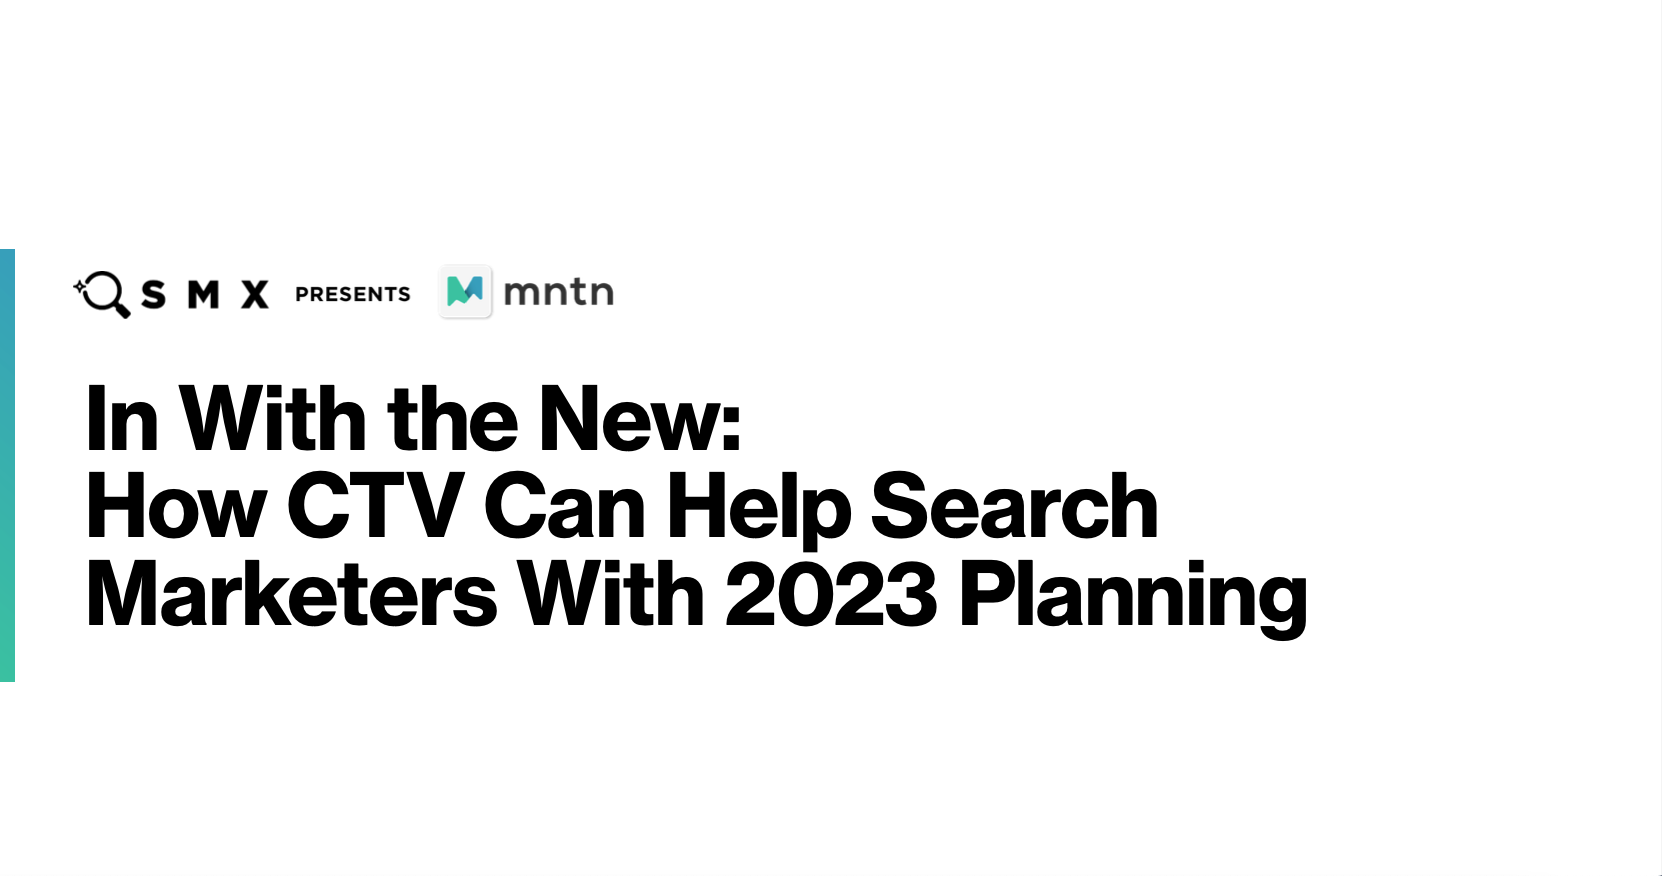 In With the New: How CTV Can Help Search Marketers with 2023 Planning